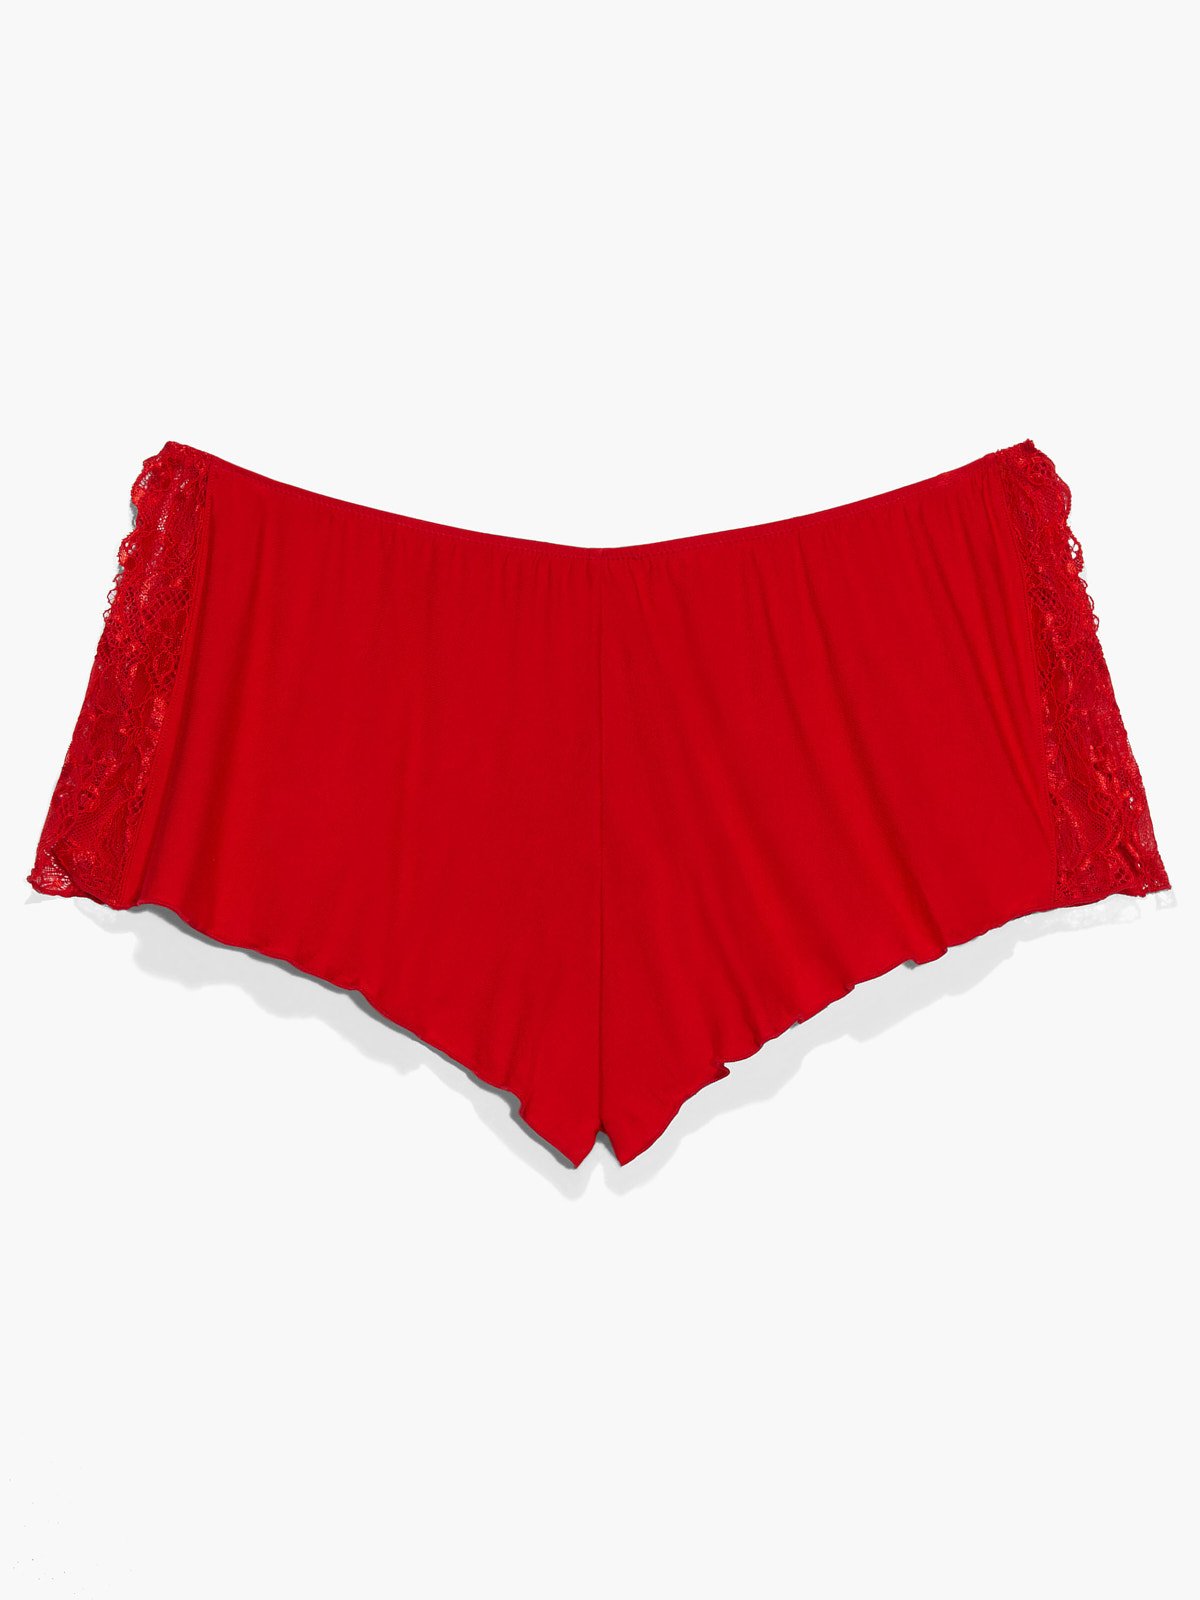 Lace'd Up Short in Pink & Red